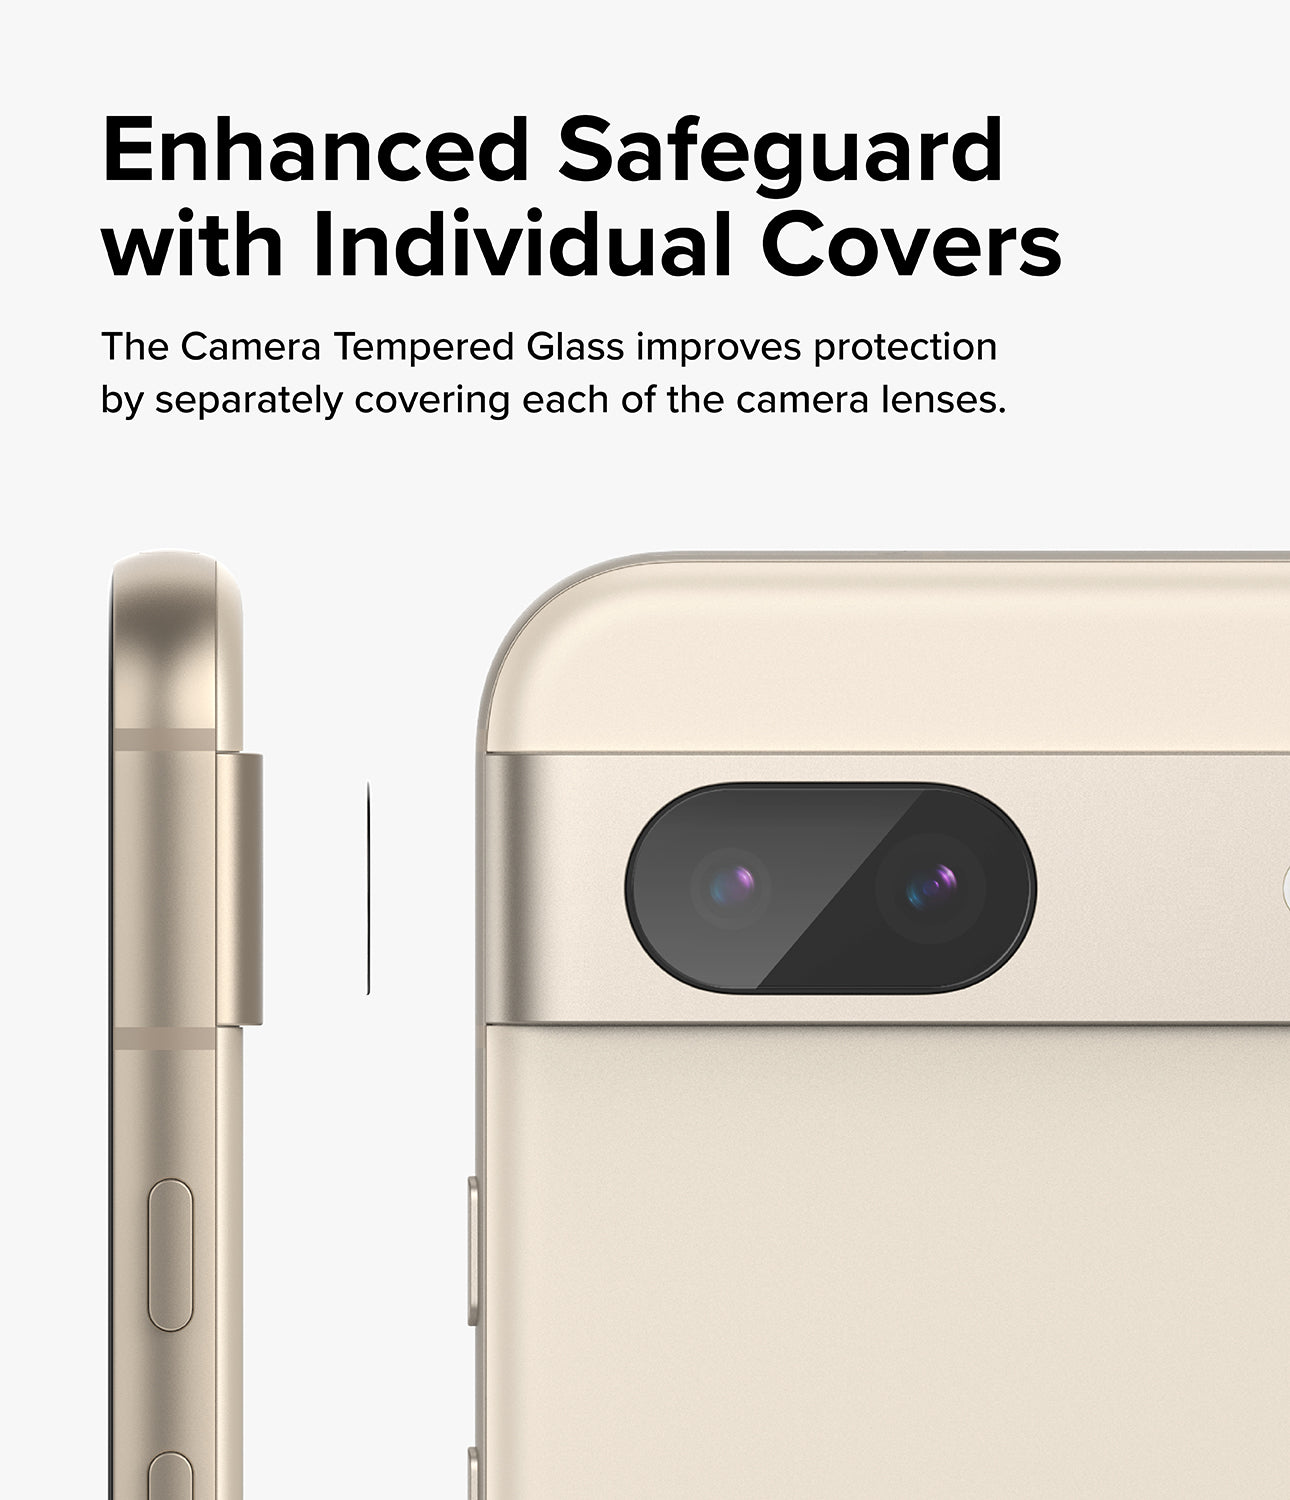 Google PIxel 8a Camera Lens Protector | Glass (3 Pack) - Enhanced Safeguard with Individual Covers. The Camera Tempered Glass improves protection by separately covering each of the camera lenses.